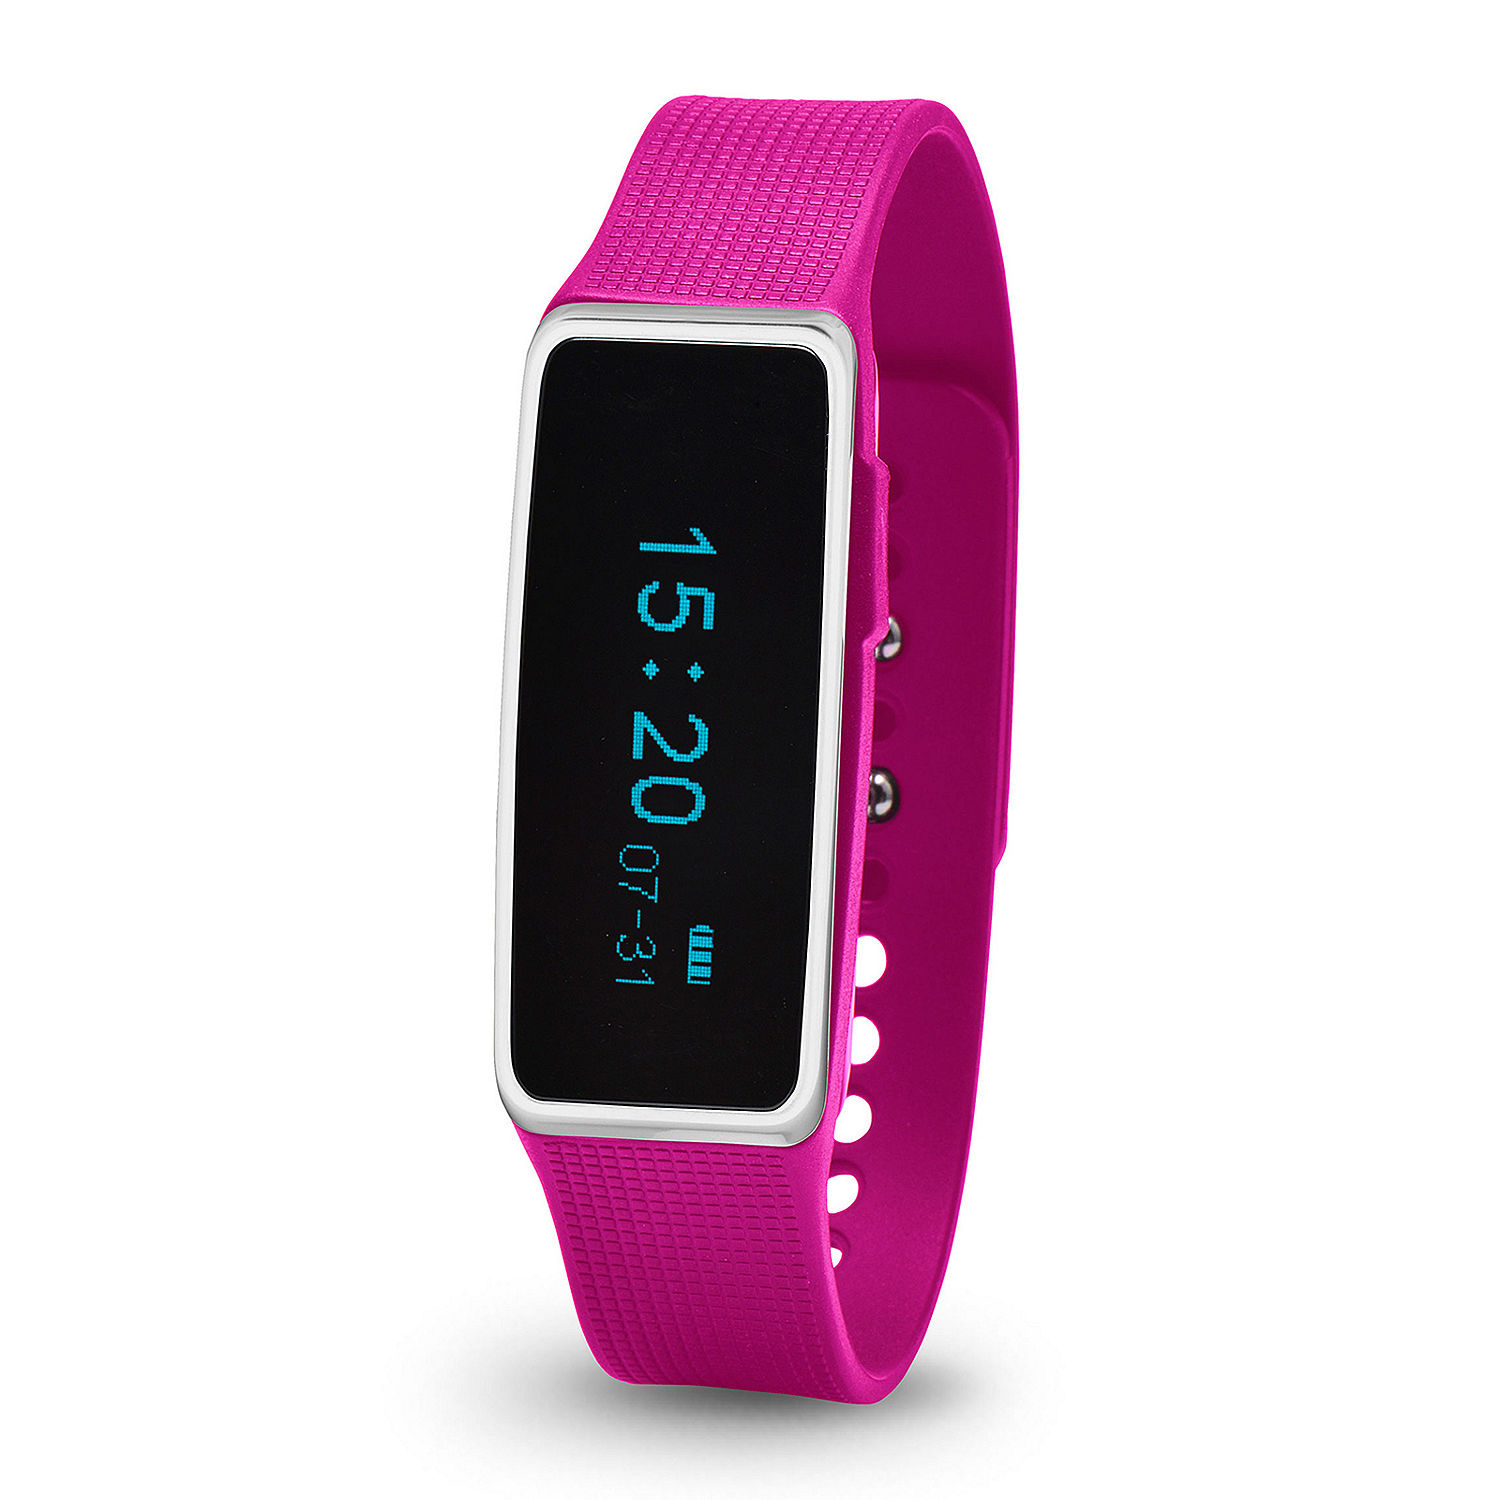 nuband-activity-and-sleep-tracking-sport-watch-jcpenney